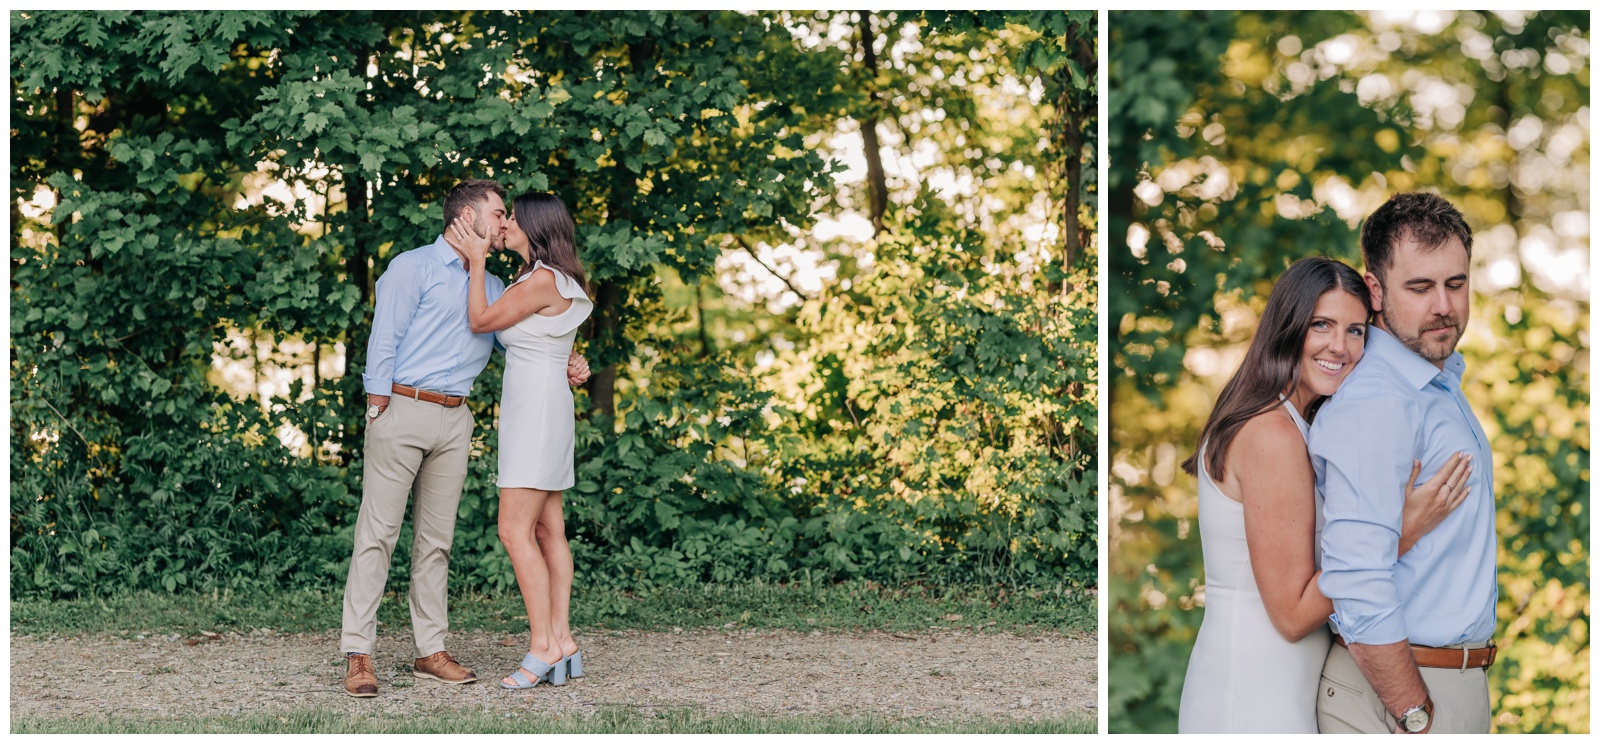 Dreamy Summer Engagement Session at Long Point State Park in Bemus Point NY